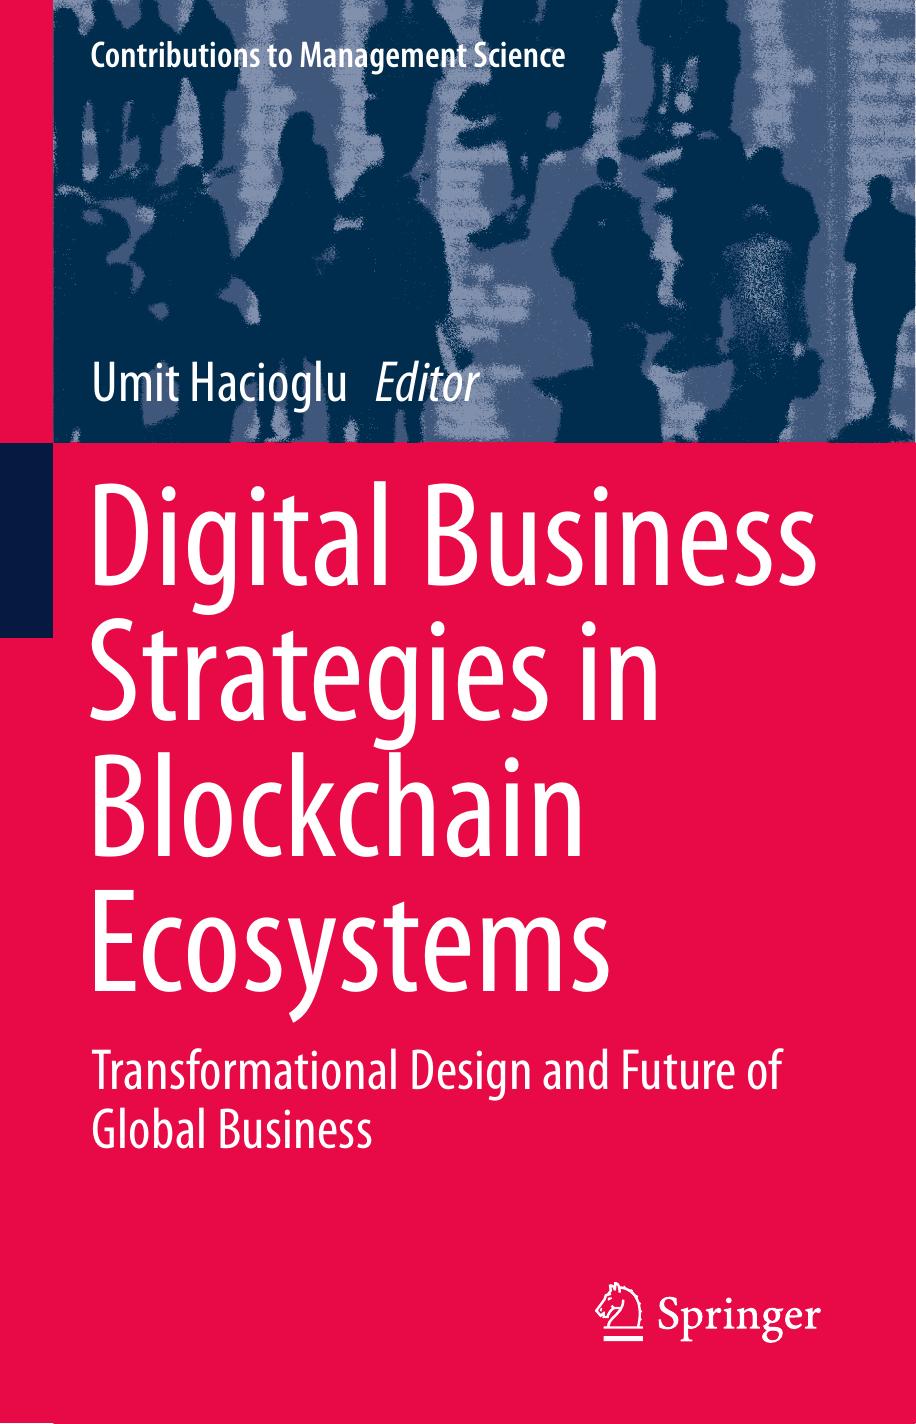 Digital Business Strategies In Blockchain Ecosystems Transformational Design And Future Of Global Business by Umit Hacioglu 2020